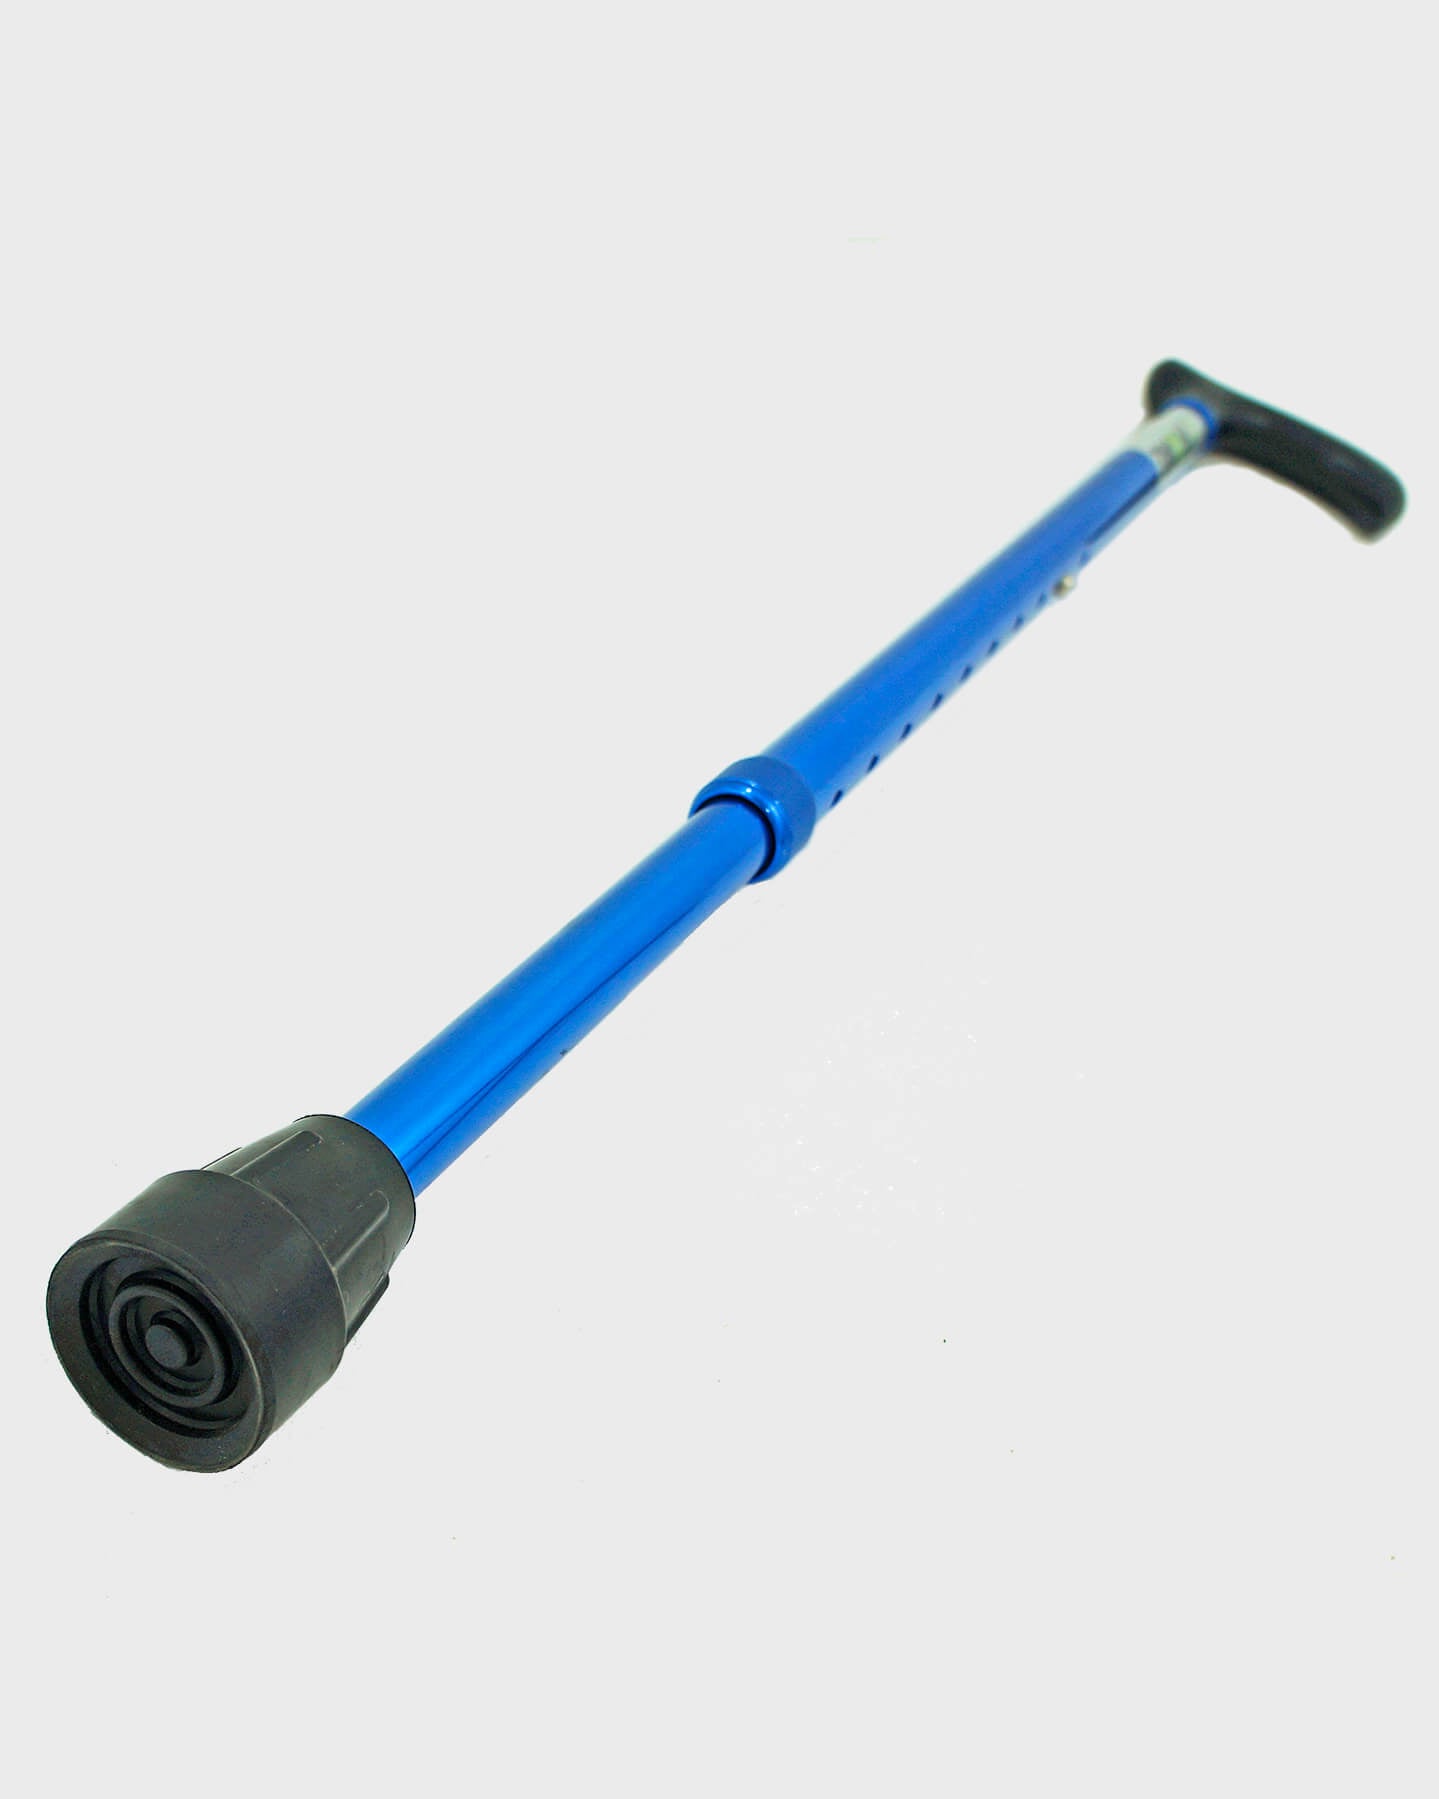 Aluminium Single Crutch - Lightweight Mobility Aid for Support